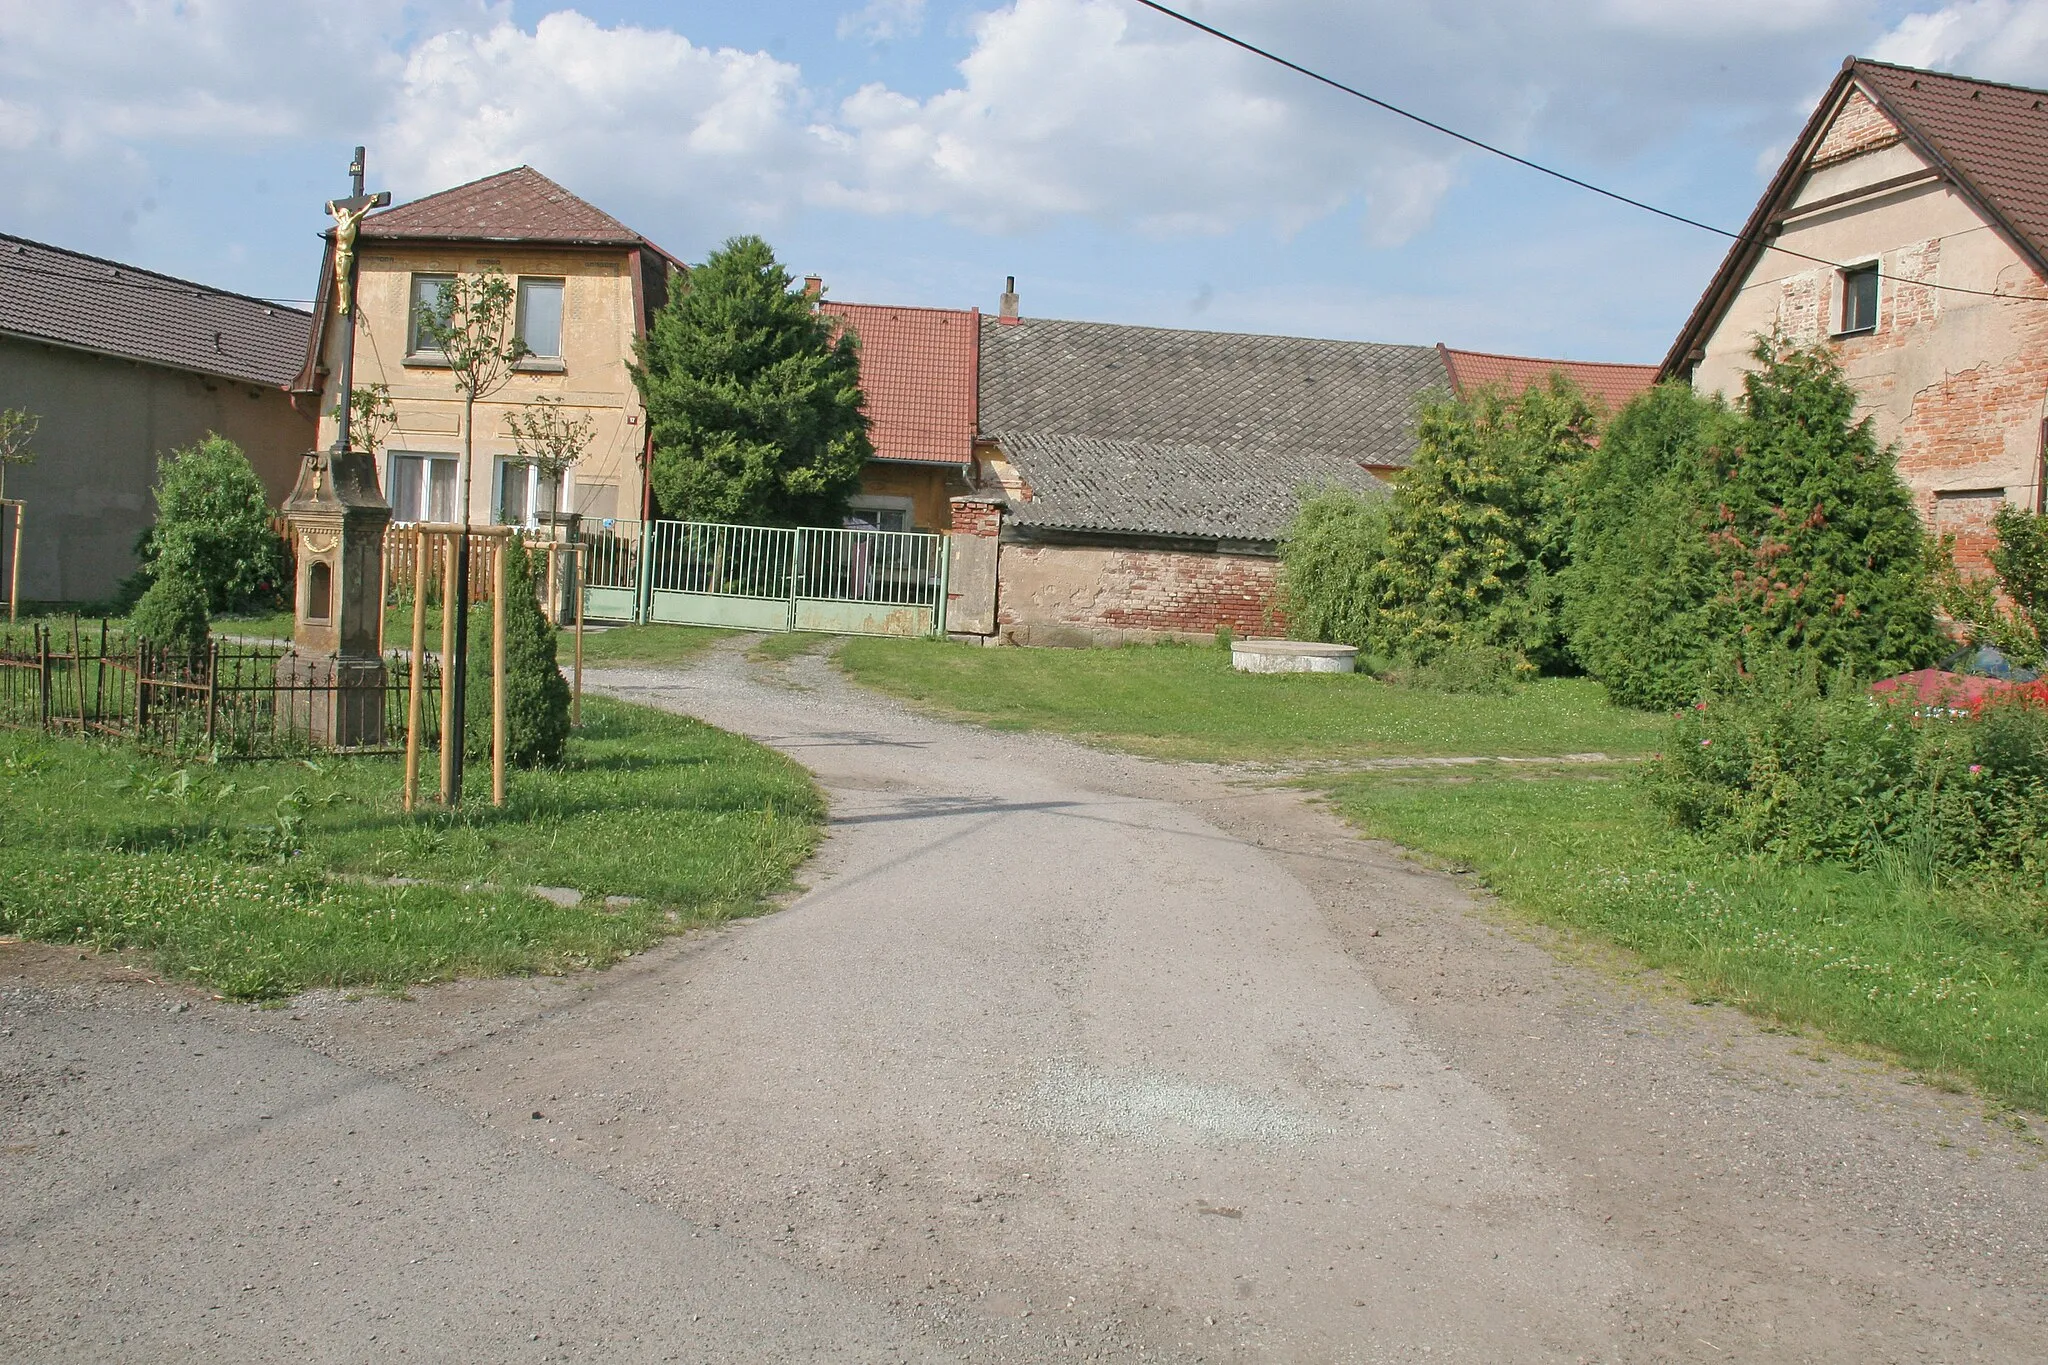 Photo showing: Vestec křížek
Camera location 50° 22′ 15.41″ N, 15° 52′ 34.99″ E View this and other nearby images on: OpenStreetMap 50.370947;   15.876387

This file was created as a part of the photographic program of Wikimedia Czech Republic. Project: Foto českých obcí The program supports Wikimedia Commons photographers in the Czech Republic.